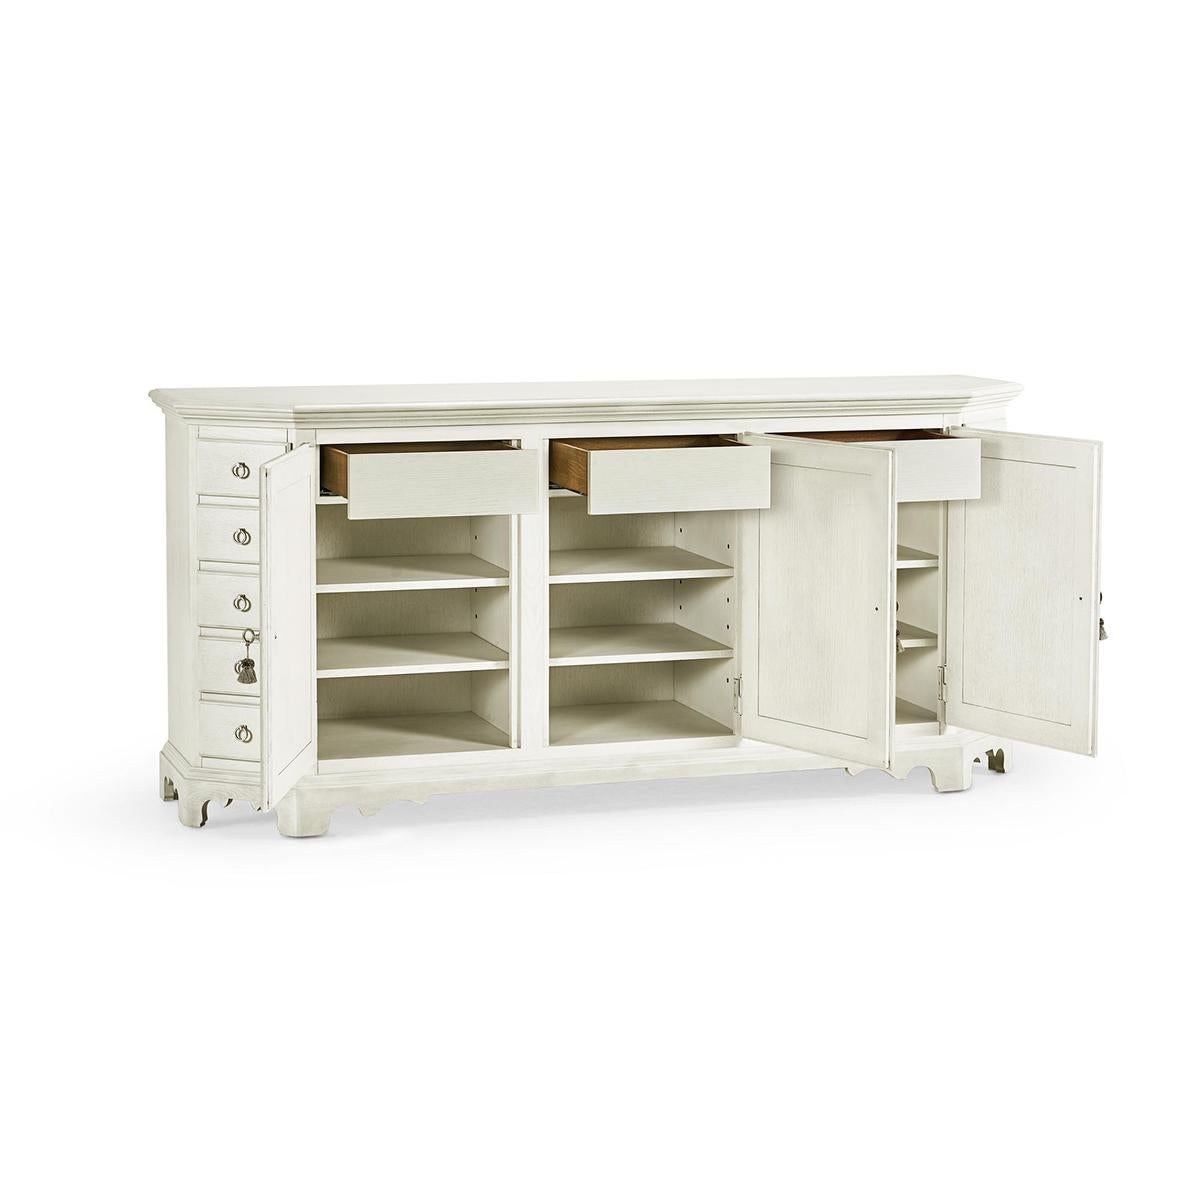 The chalk white painted sideboard has a unique canted corner design with thirteen hand-crafted drawers. Behind classically sculpted doors finished in nordic wheat, three interior drawers feature removable felt-lined silverware trays.

With